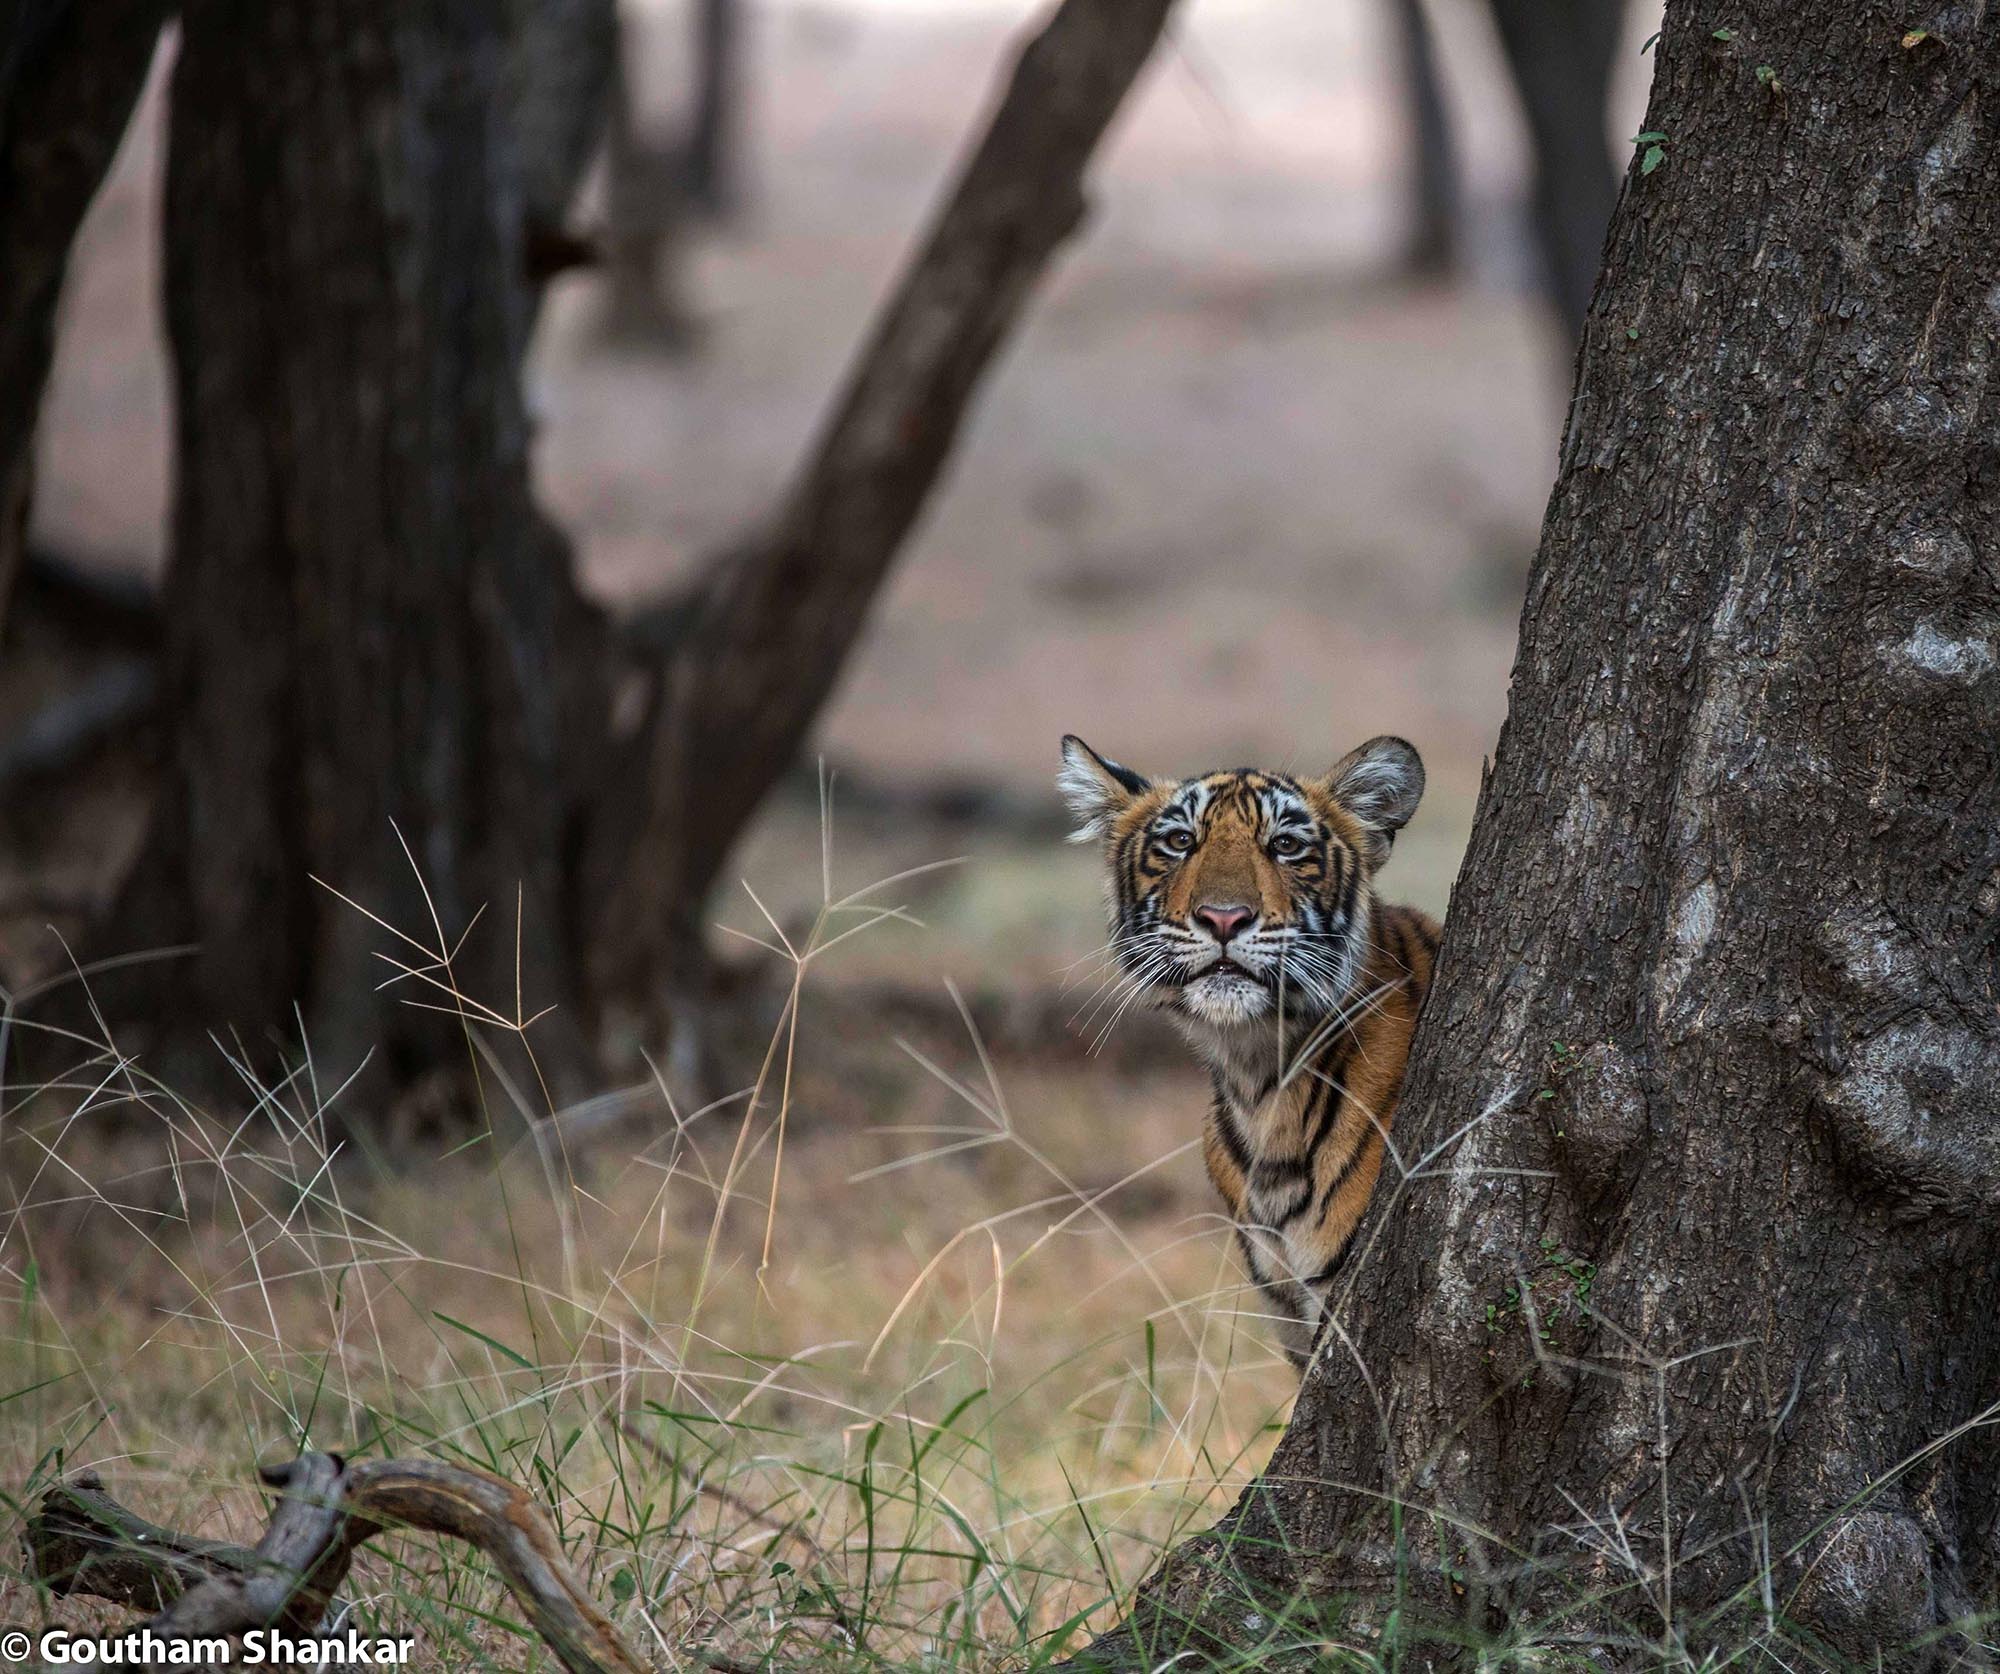 T19 cub from Ranthambore, Rajasthan